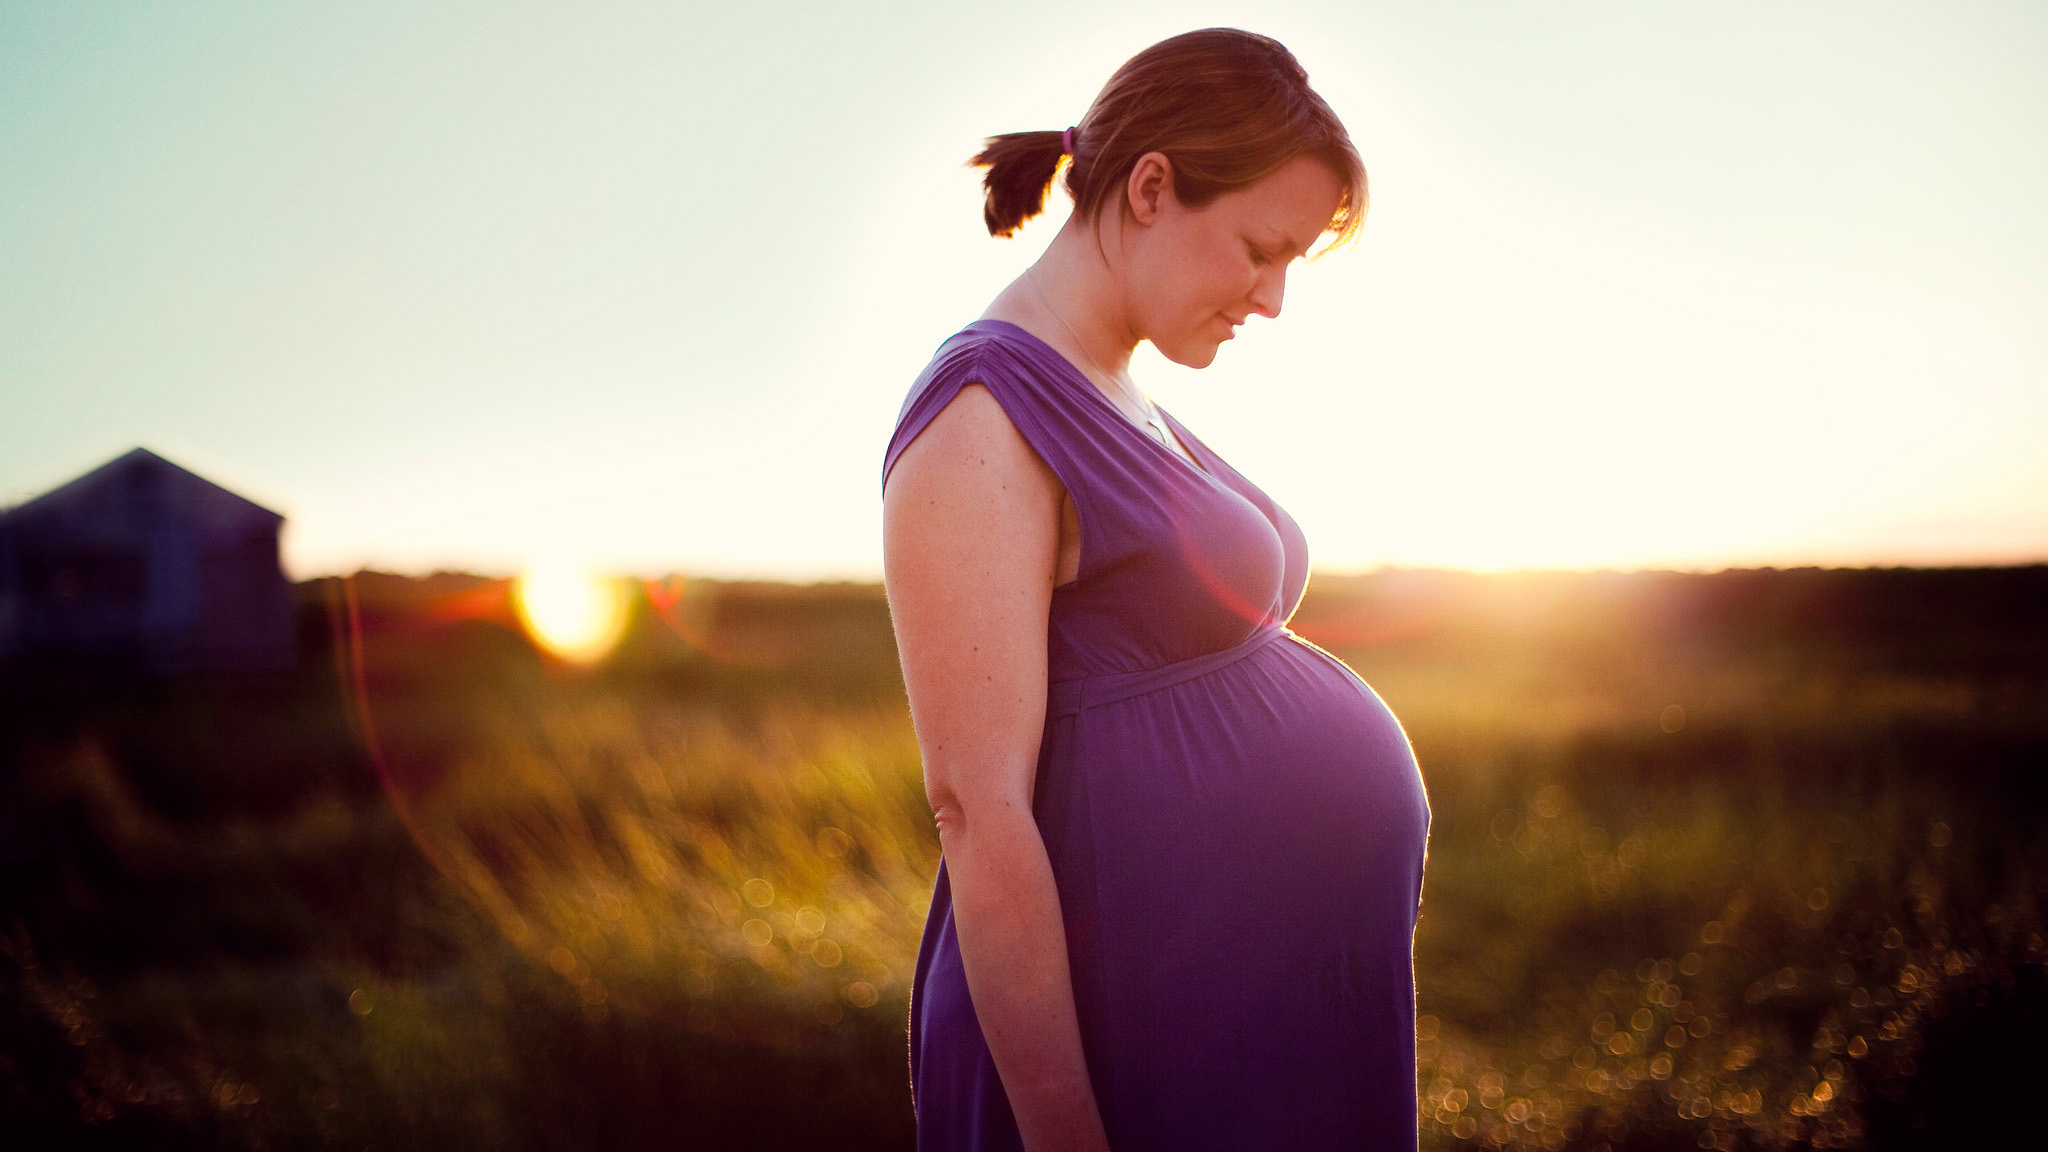 A pregnant woman in a purple dress stands in a field at sunset.